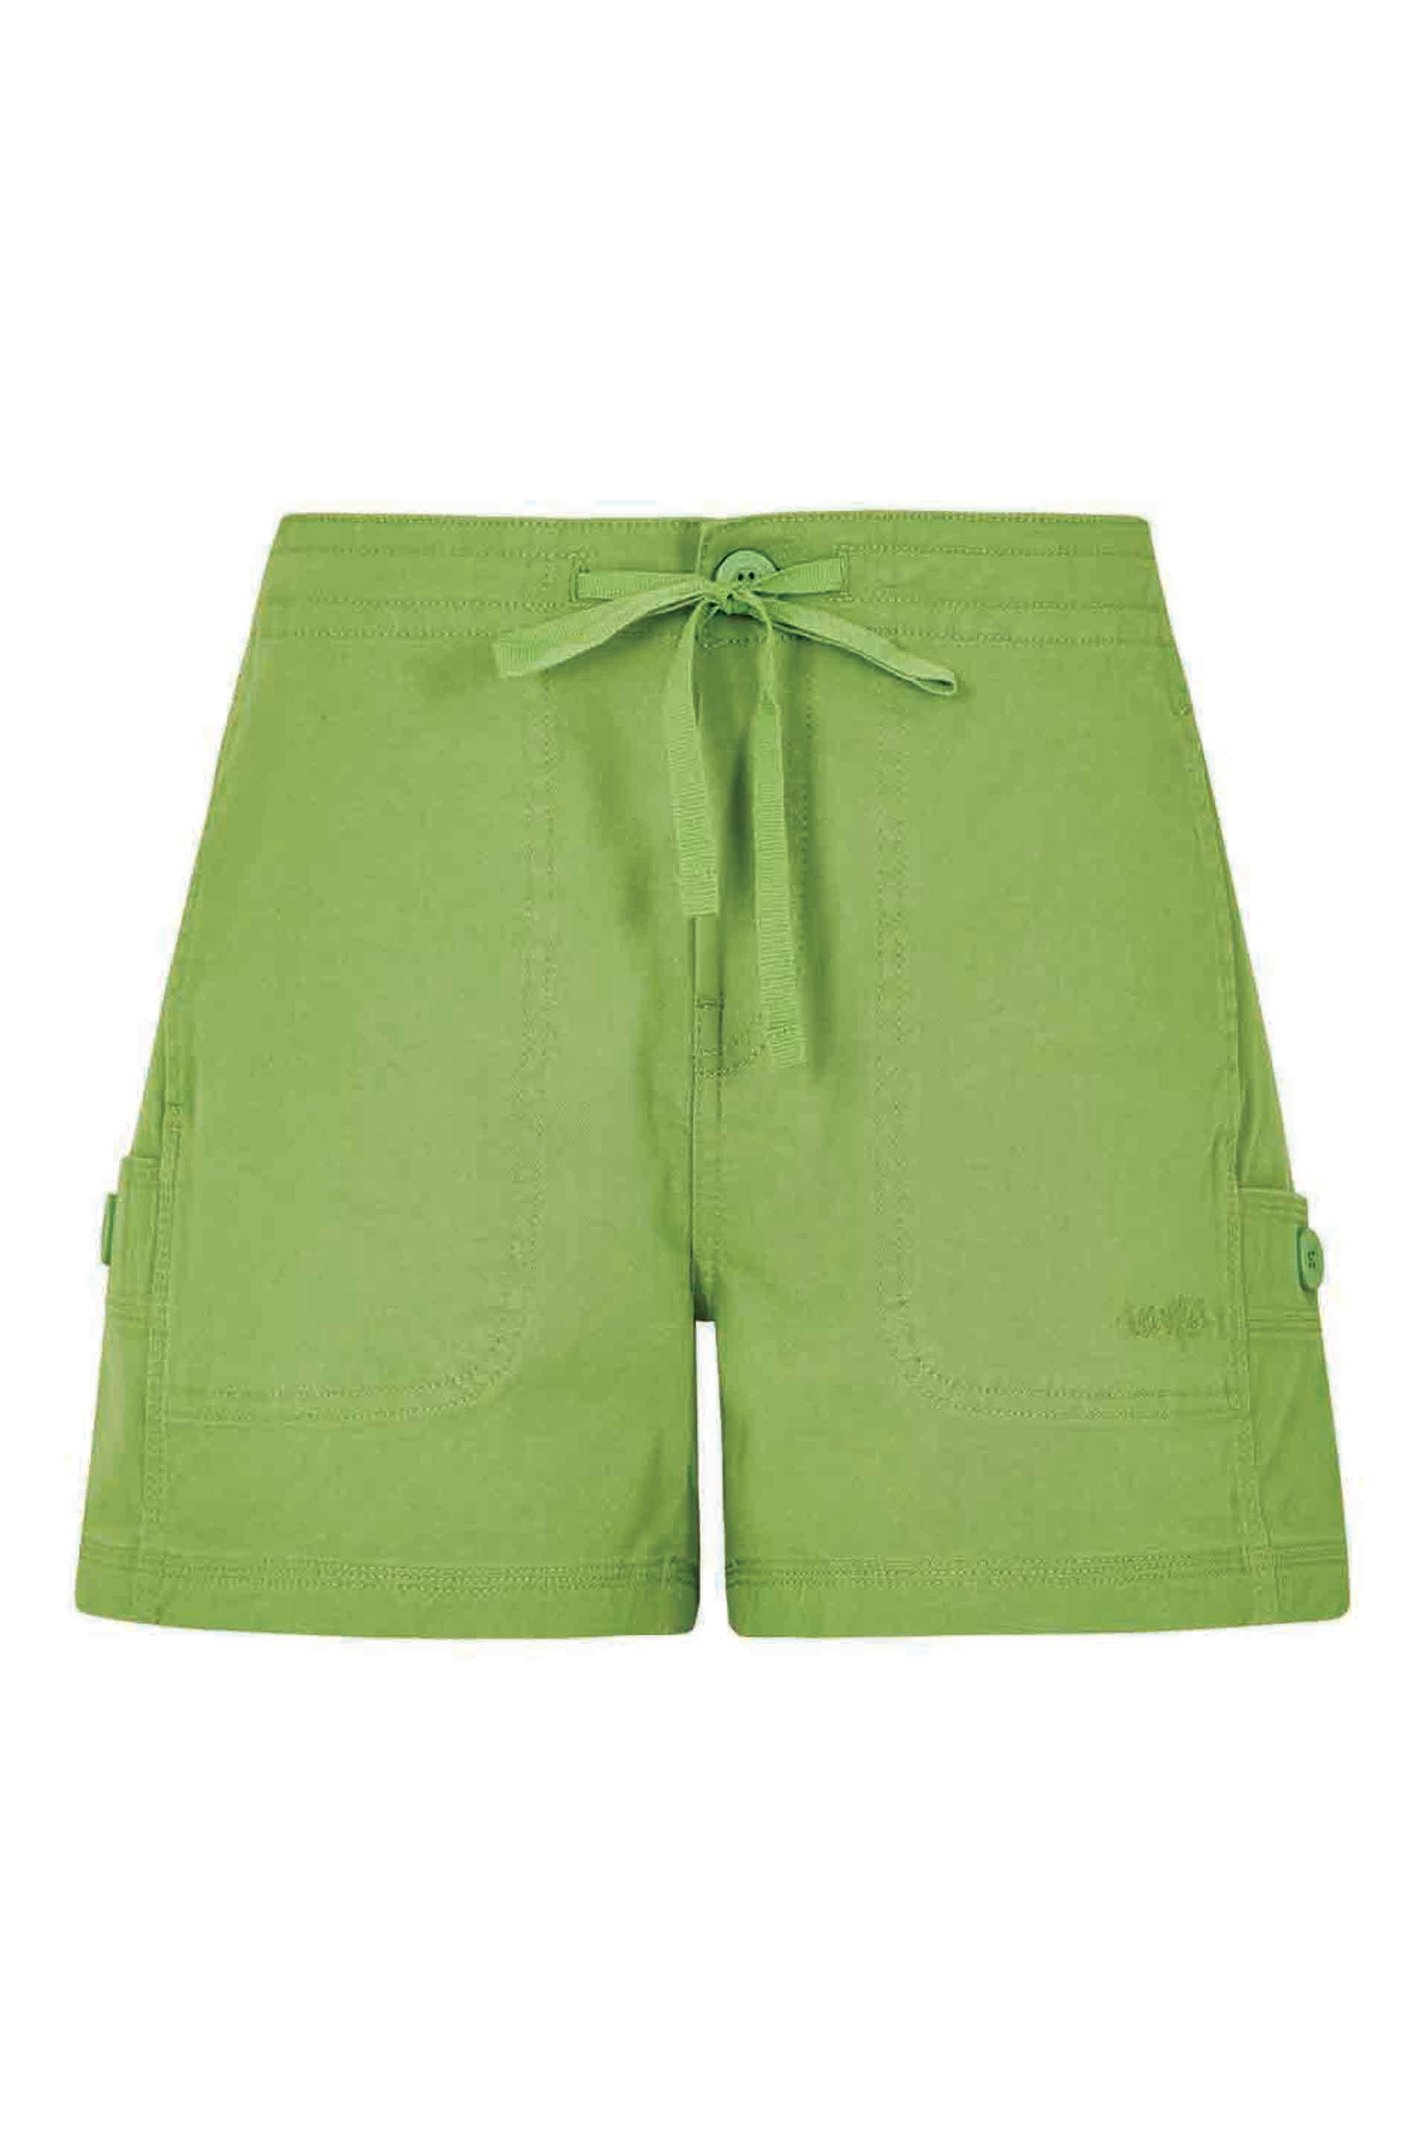 Weird Fish Willoughby Summer Shorts Kiwi Size 14